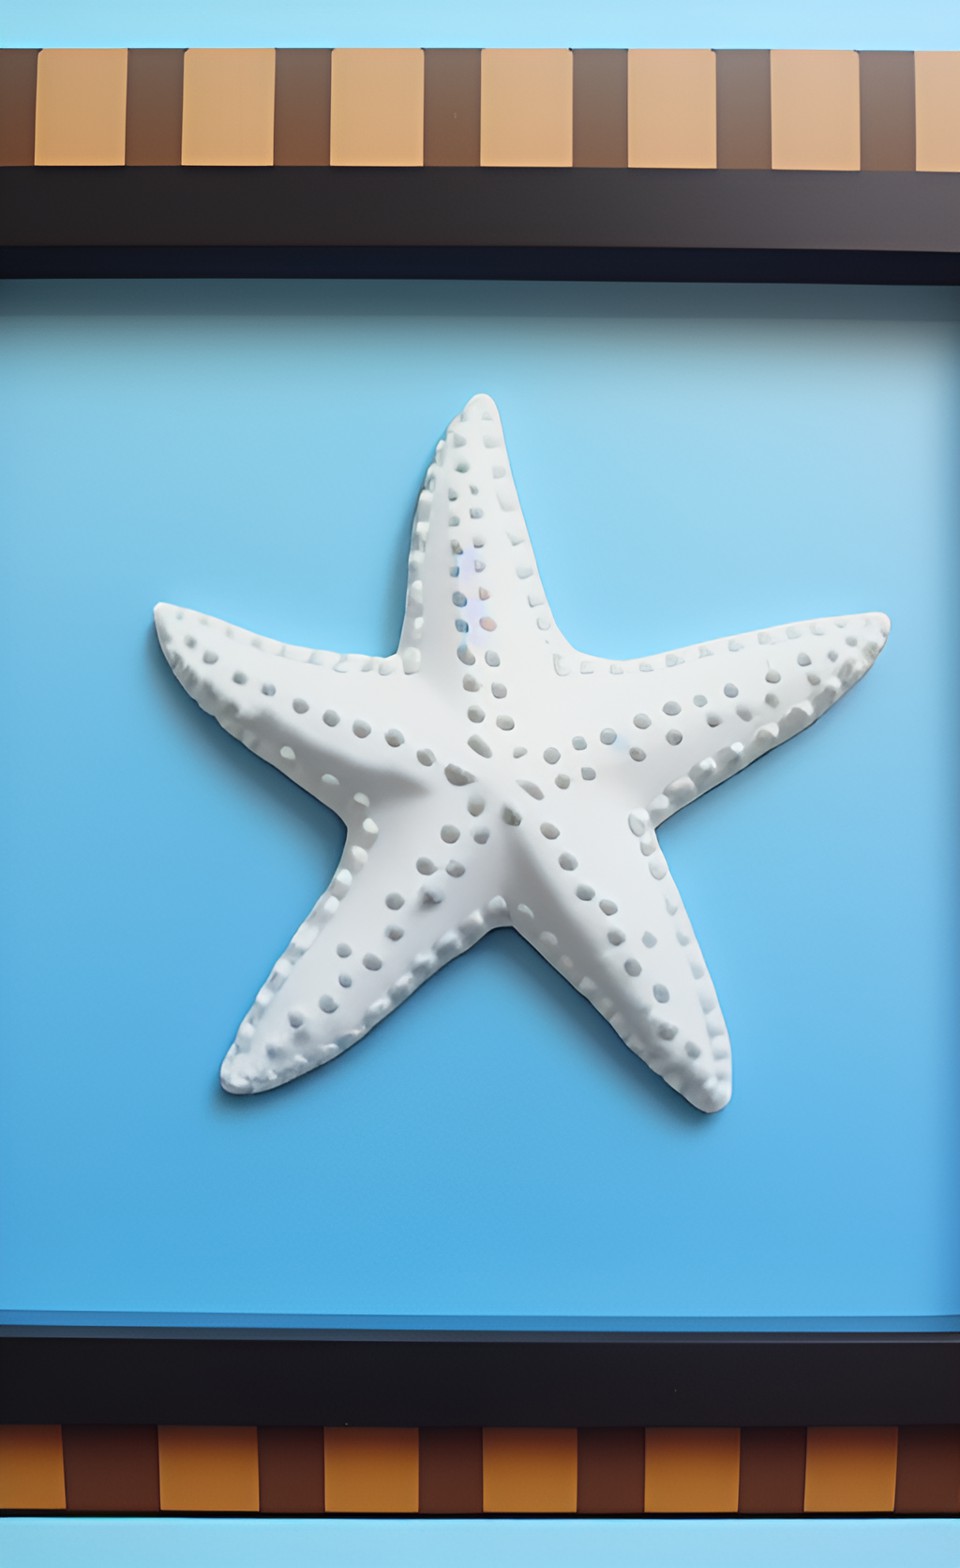 AI image of a clay starfish in a frame.